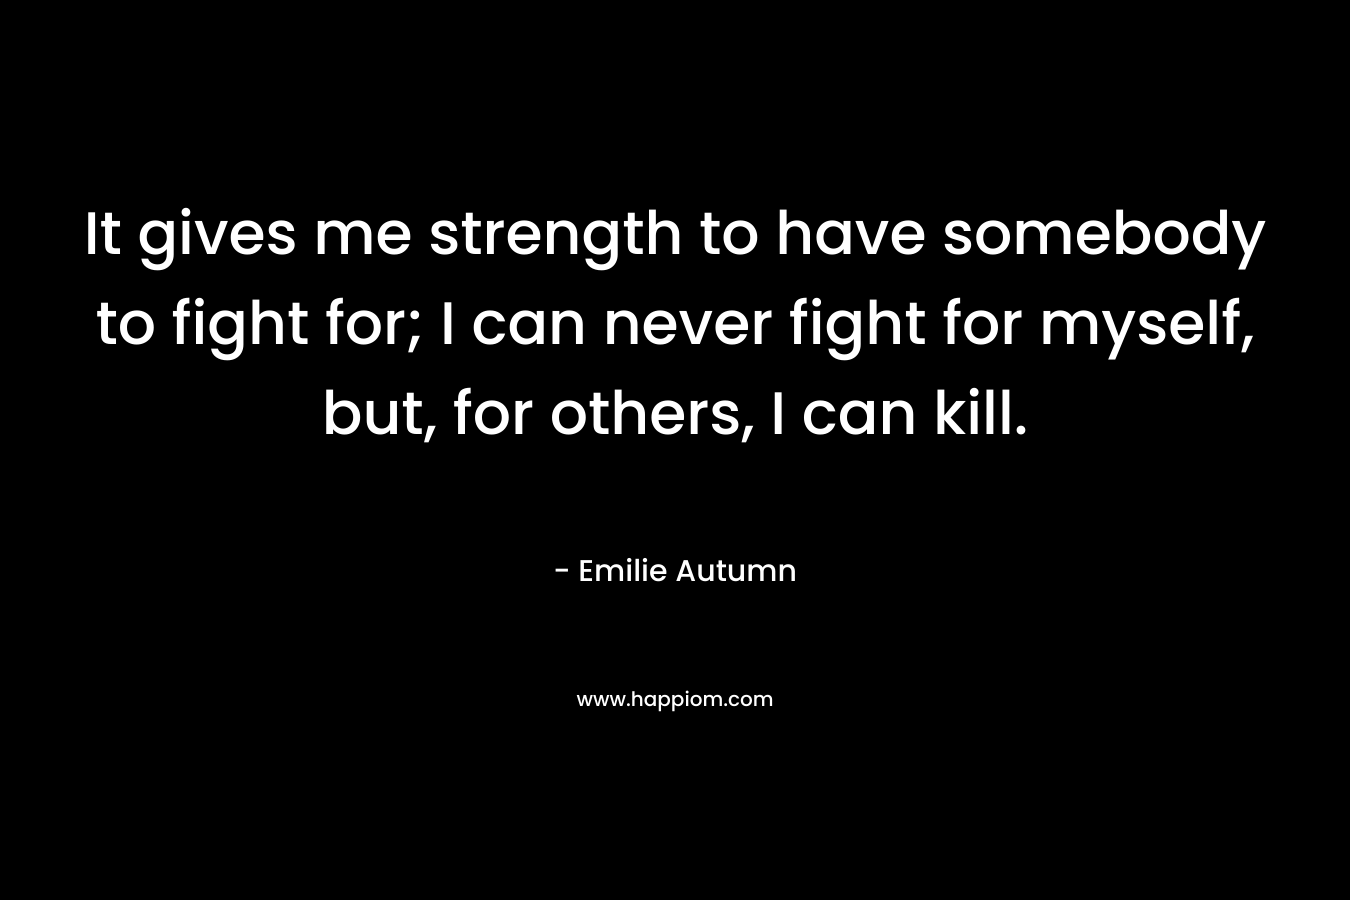 It gives me strength to have somebody to fight for; I can never fight for myself, but, for others, I can kill. – Emilie Autumn